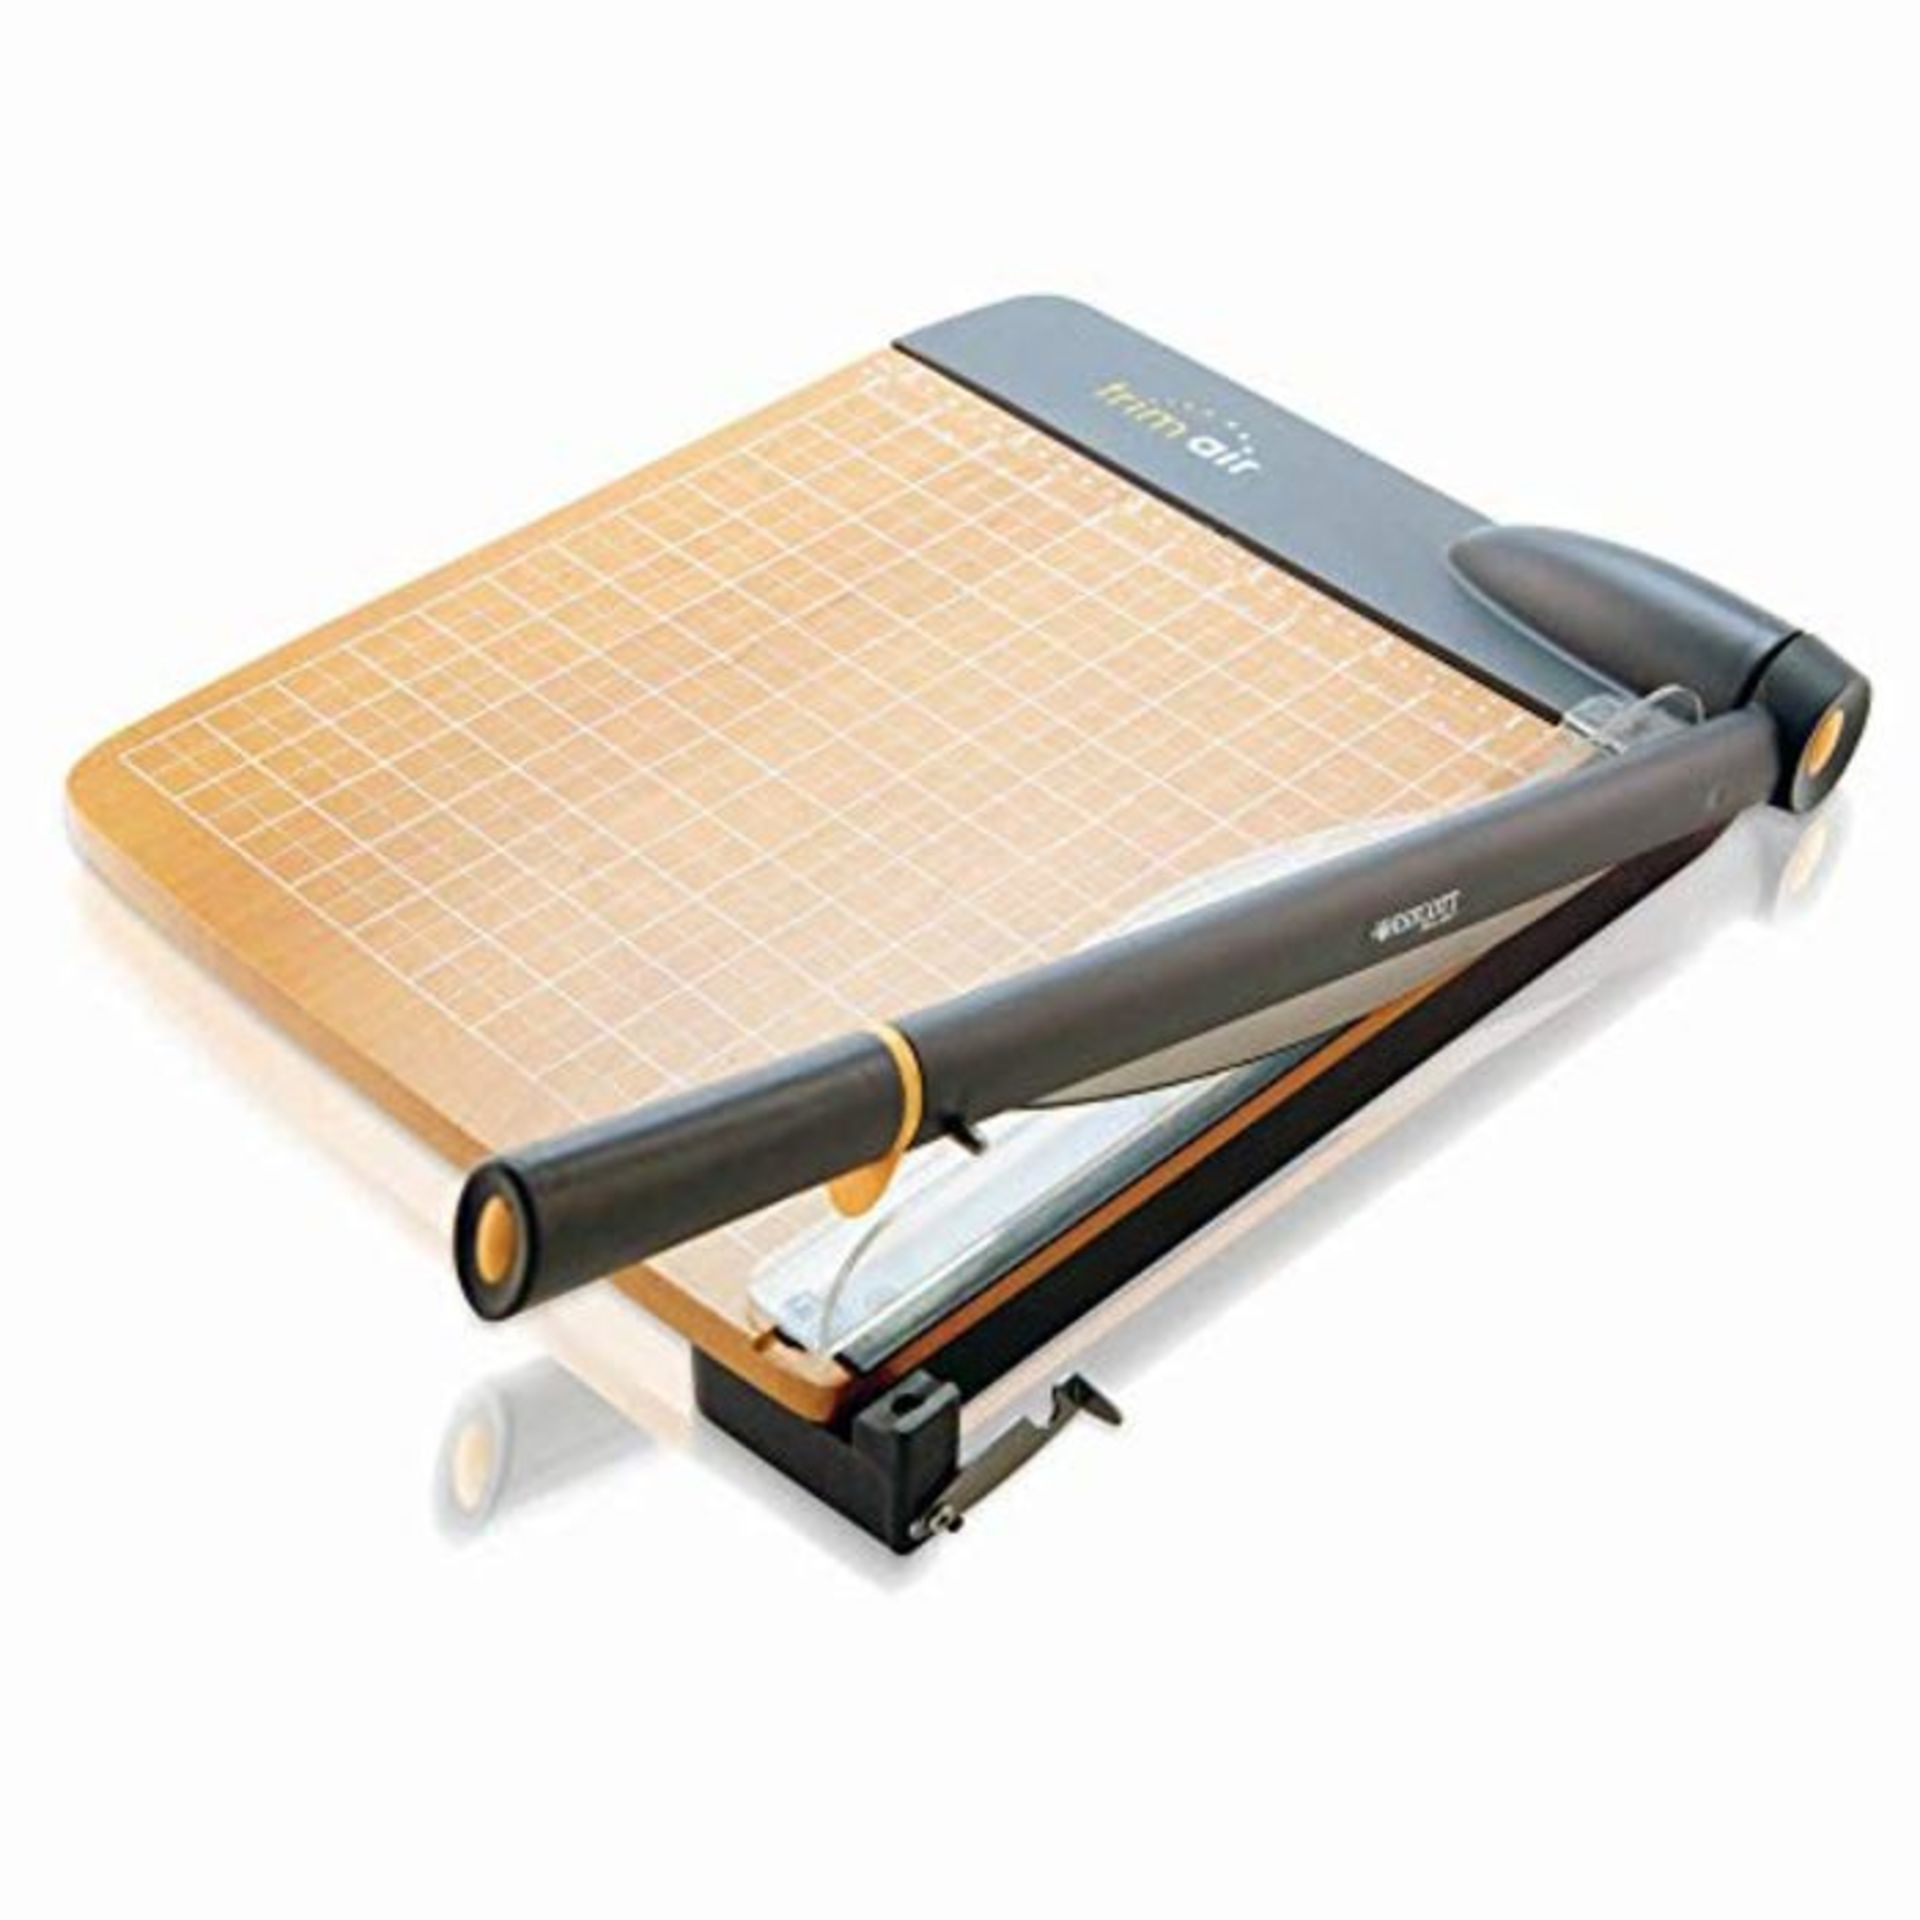 Westcott 12-Inch Trimair Titanium Wood Guillotine Paper Trimmer with Anti-Microbial Pr